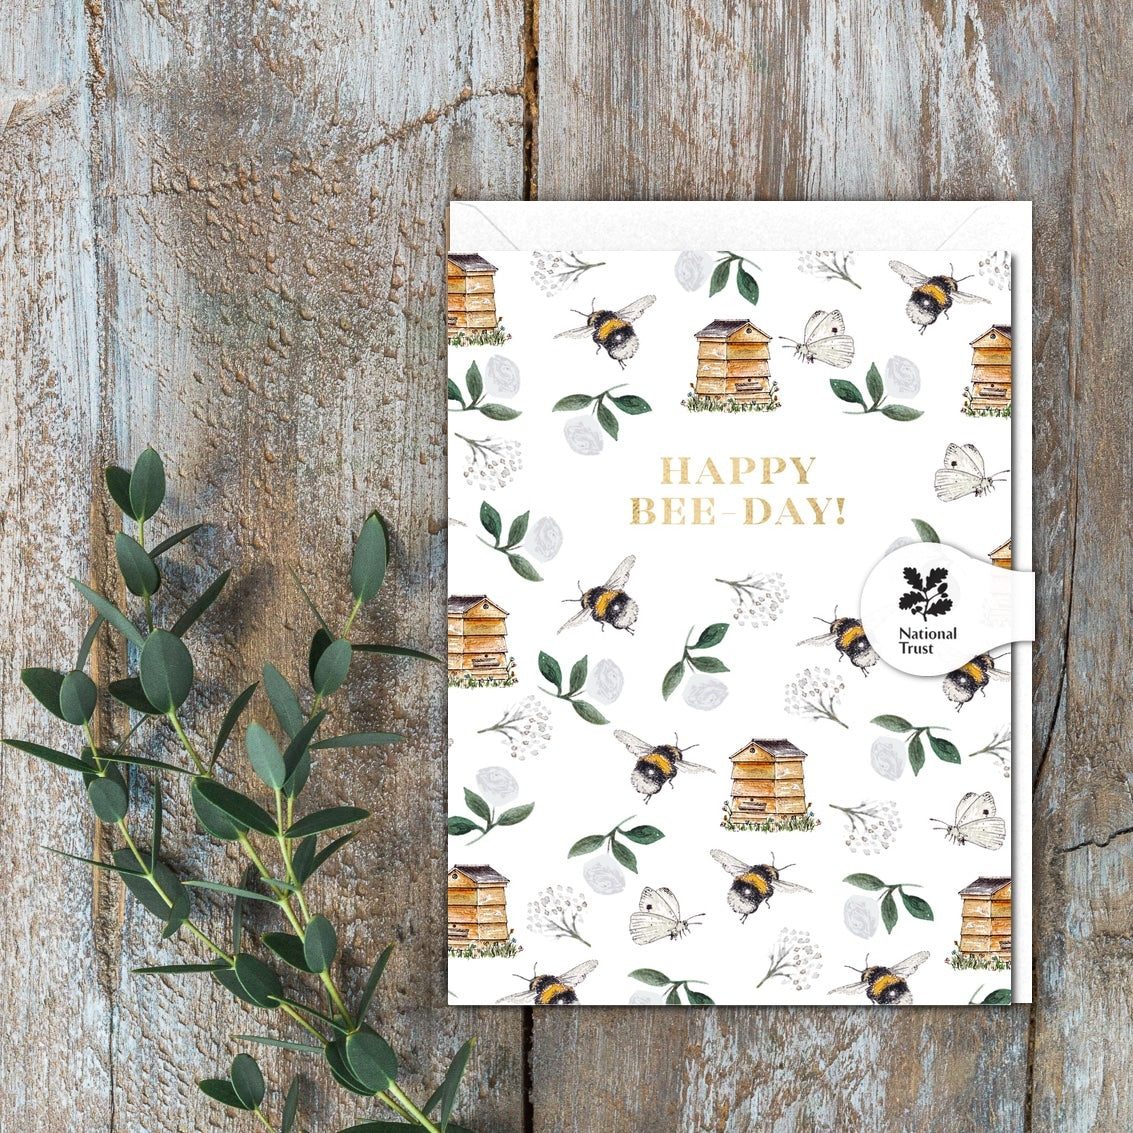 Toasted Crumpet Happy Bee-Day! Bees and Bee Hives Mini Card